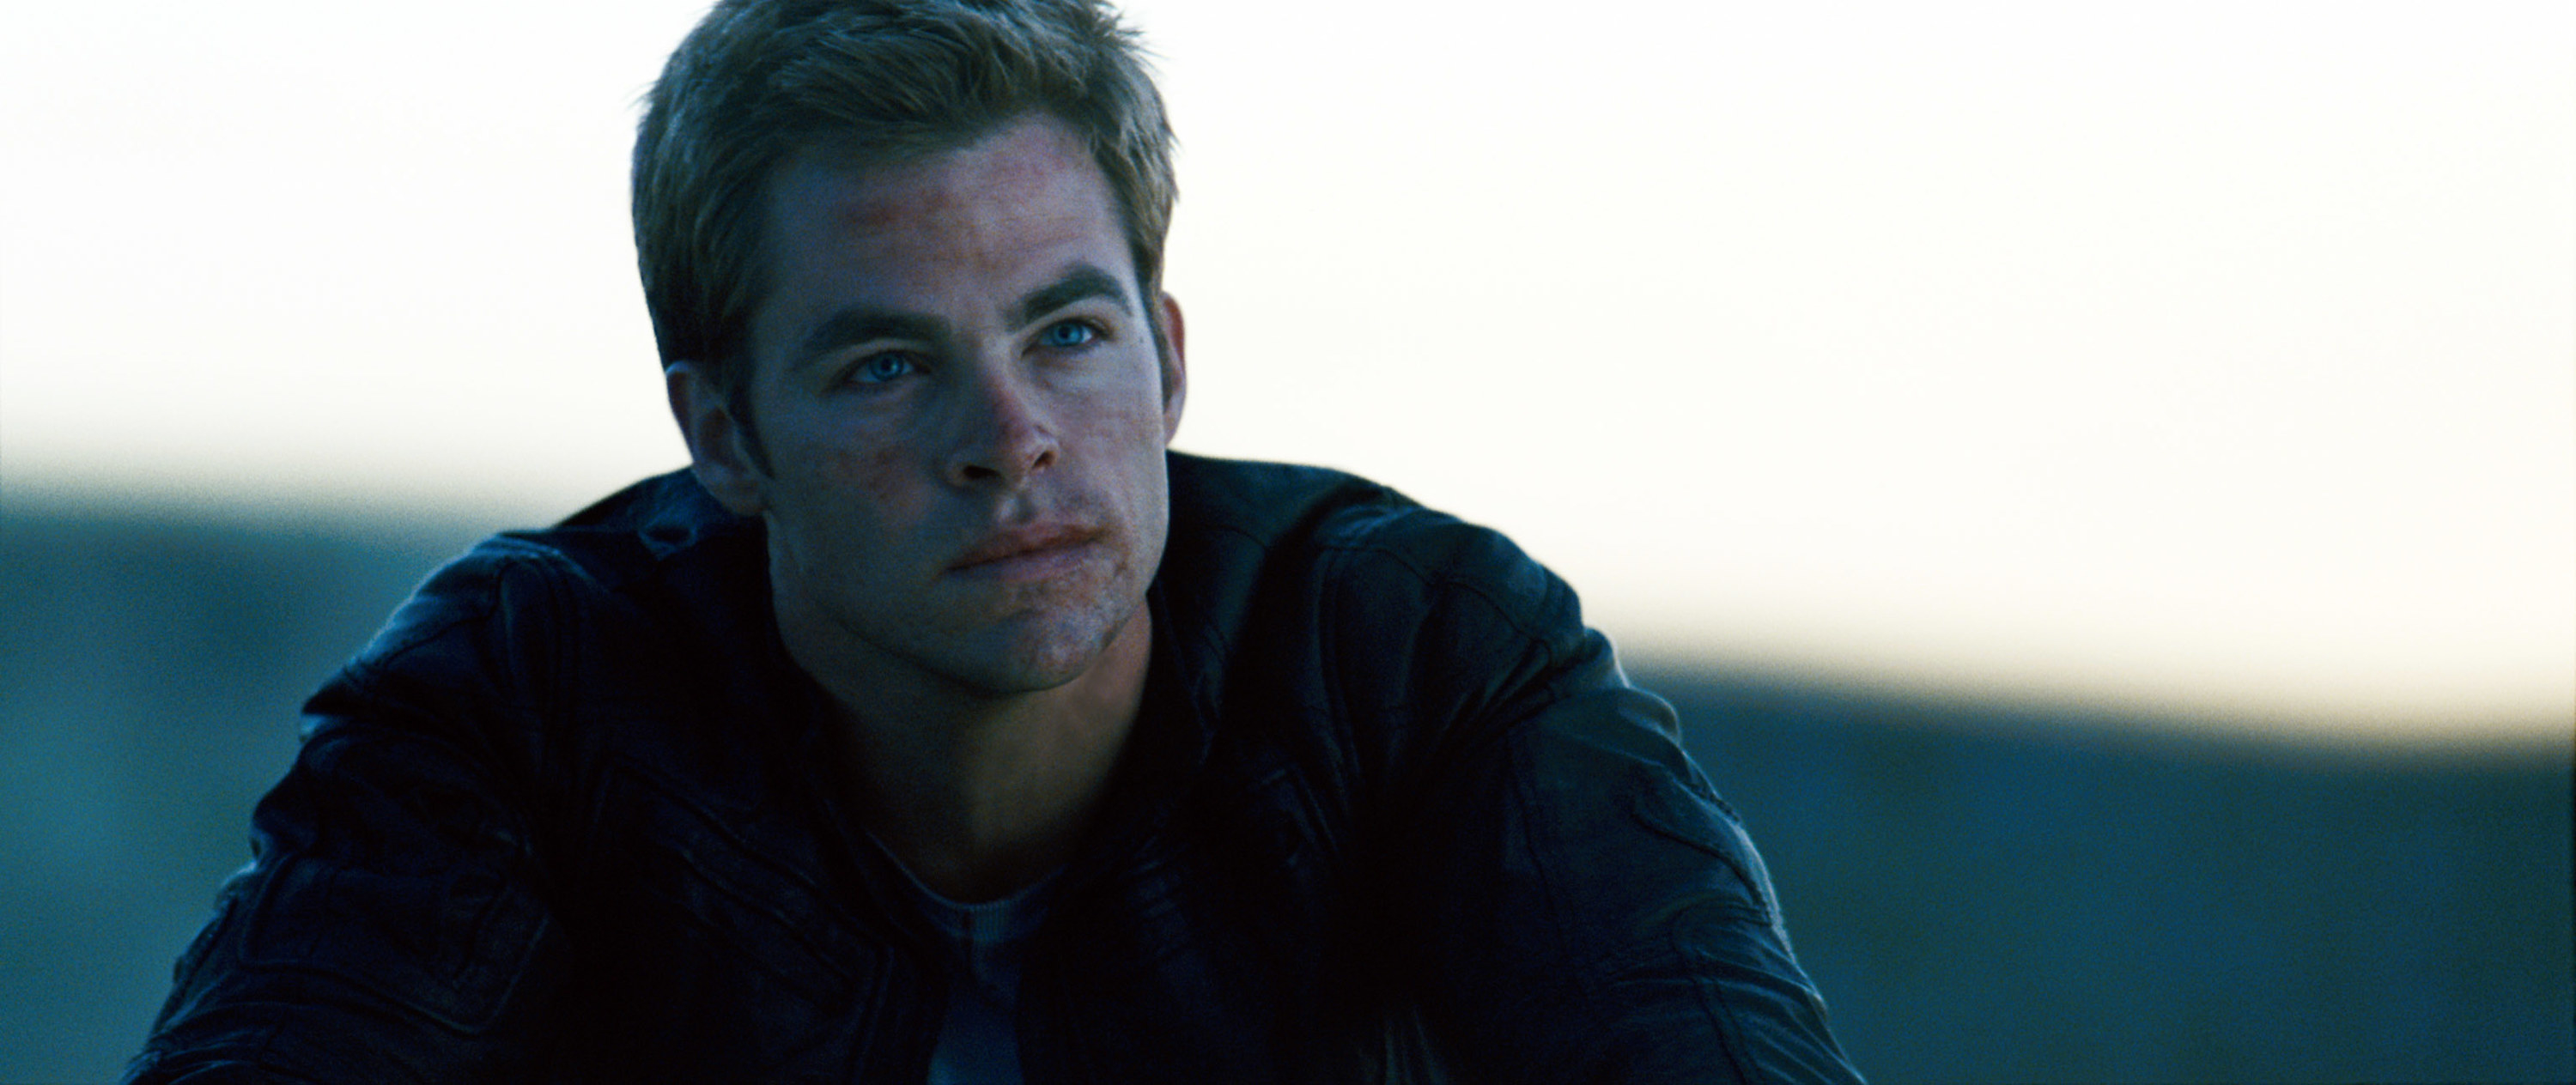 Chris Pine rides a motorcycle and looks up at the sky